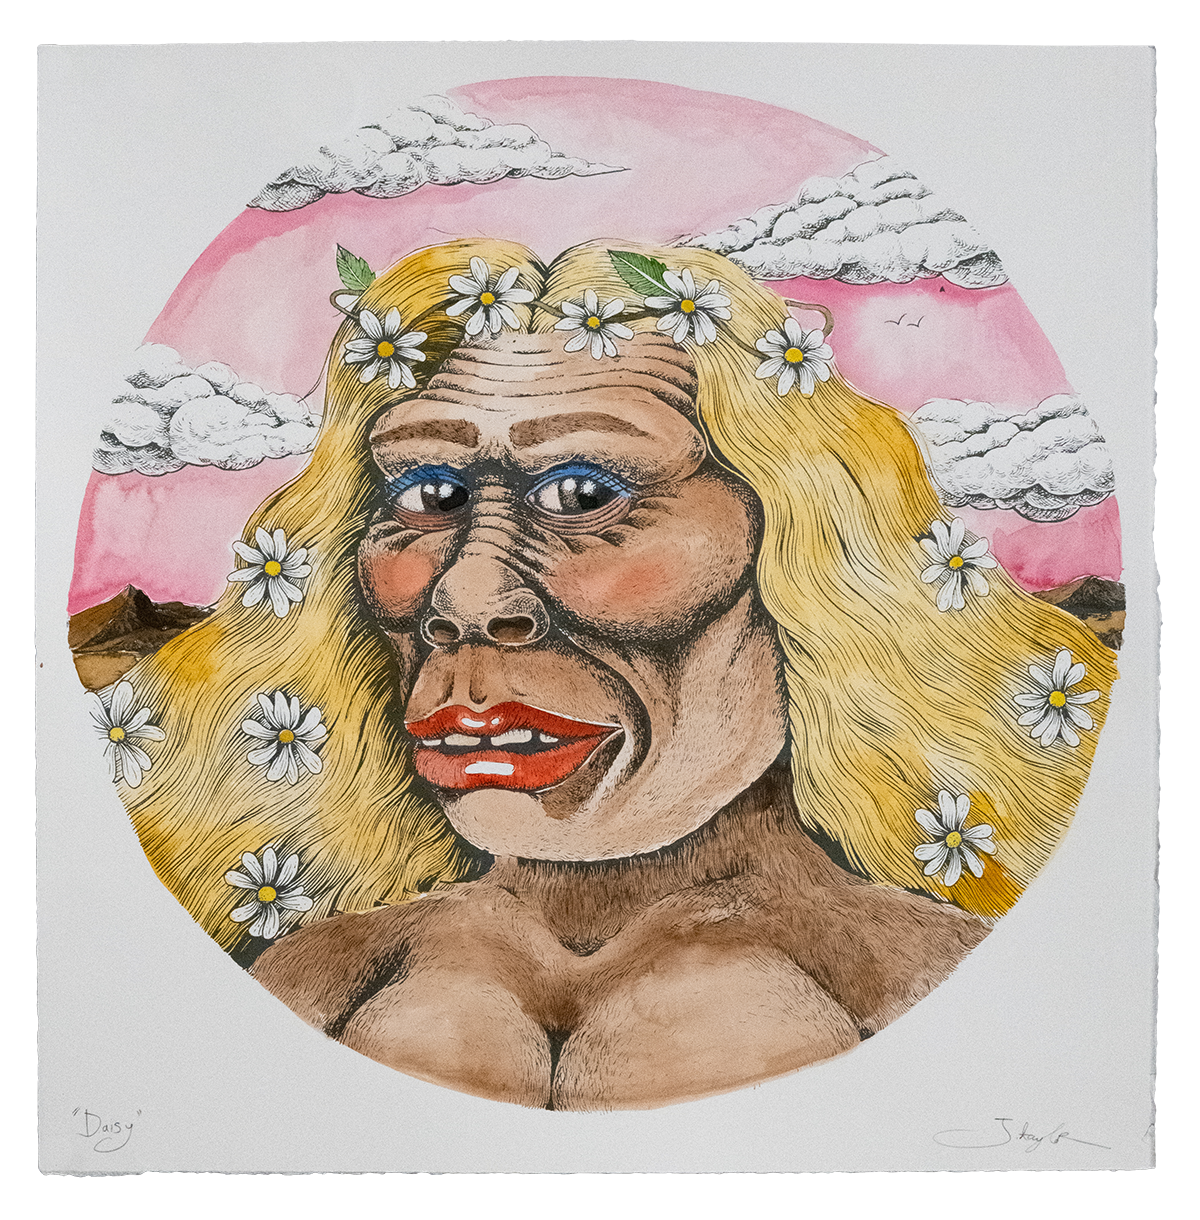 Neanderthal (Daisy) Hand-finished with Watercolours